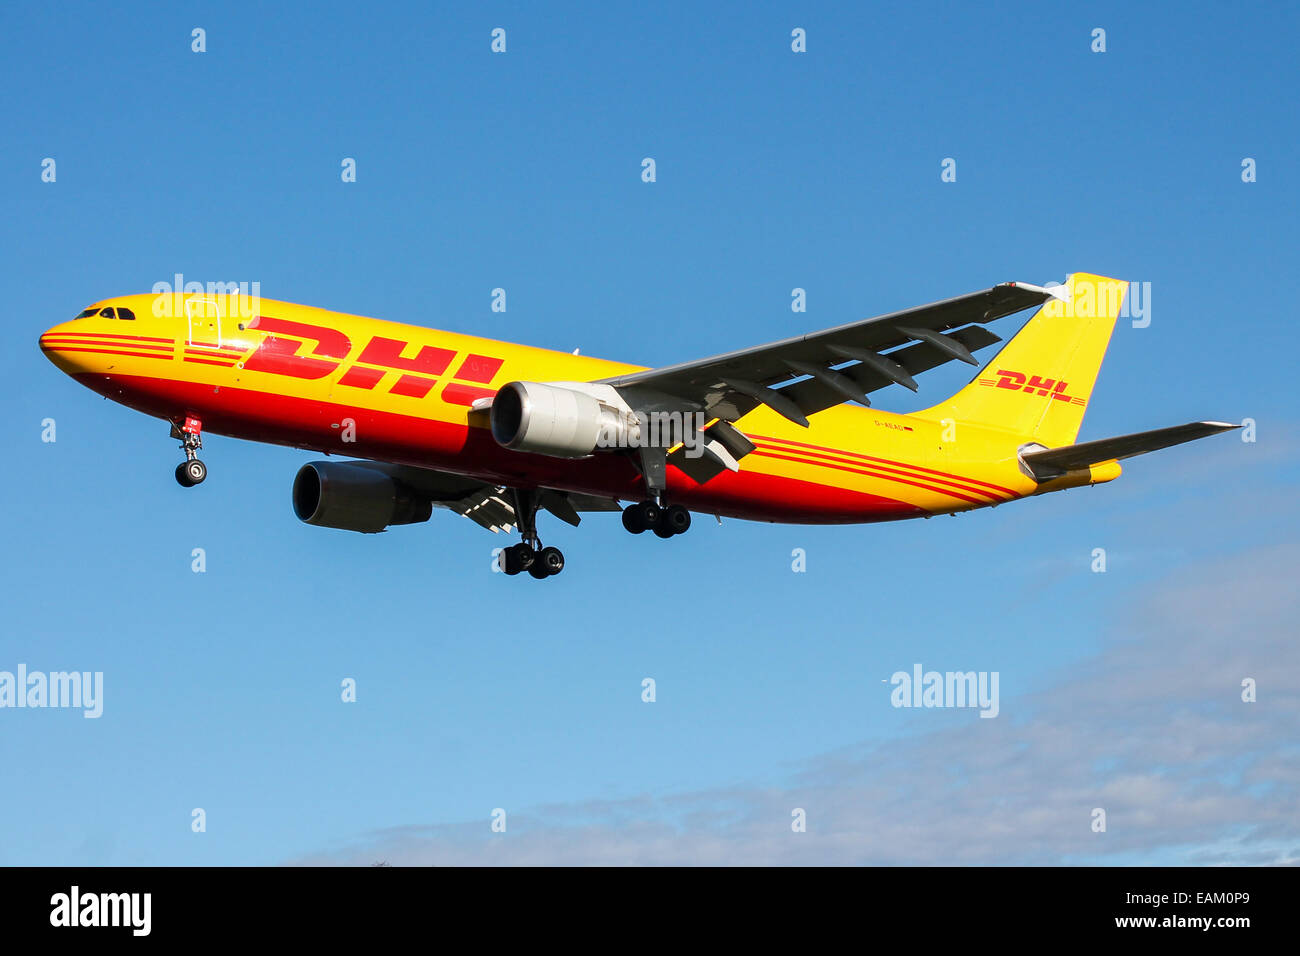 DHL Airbus A300 approaches runway 27L at London Heathrow Airport. Stock Photo